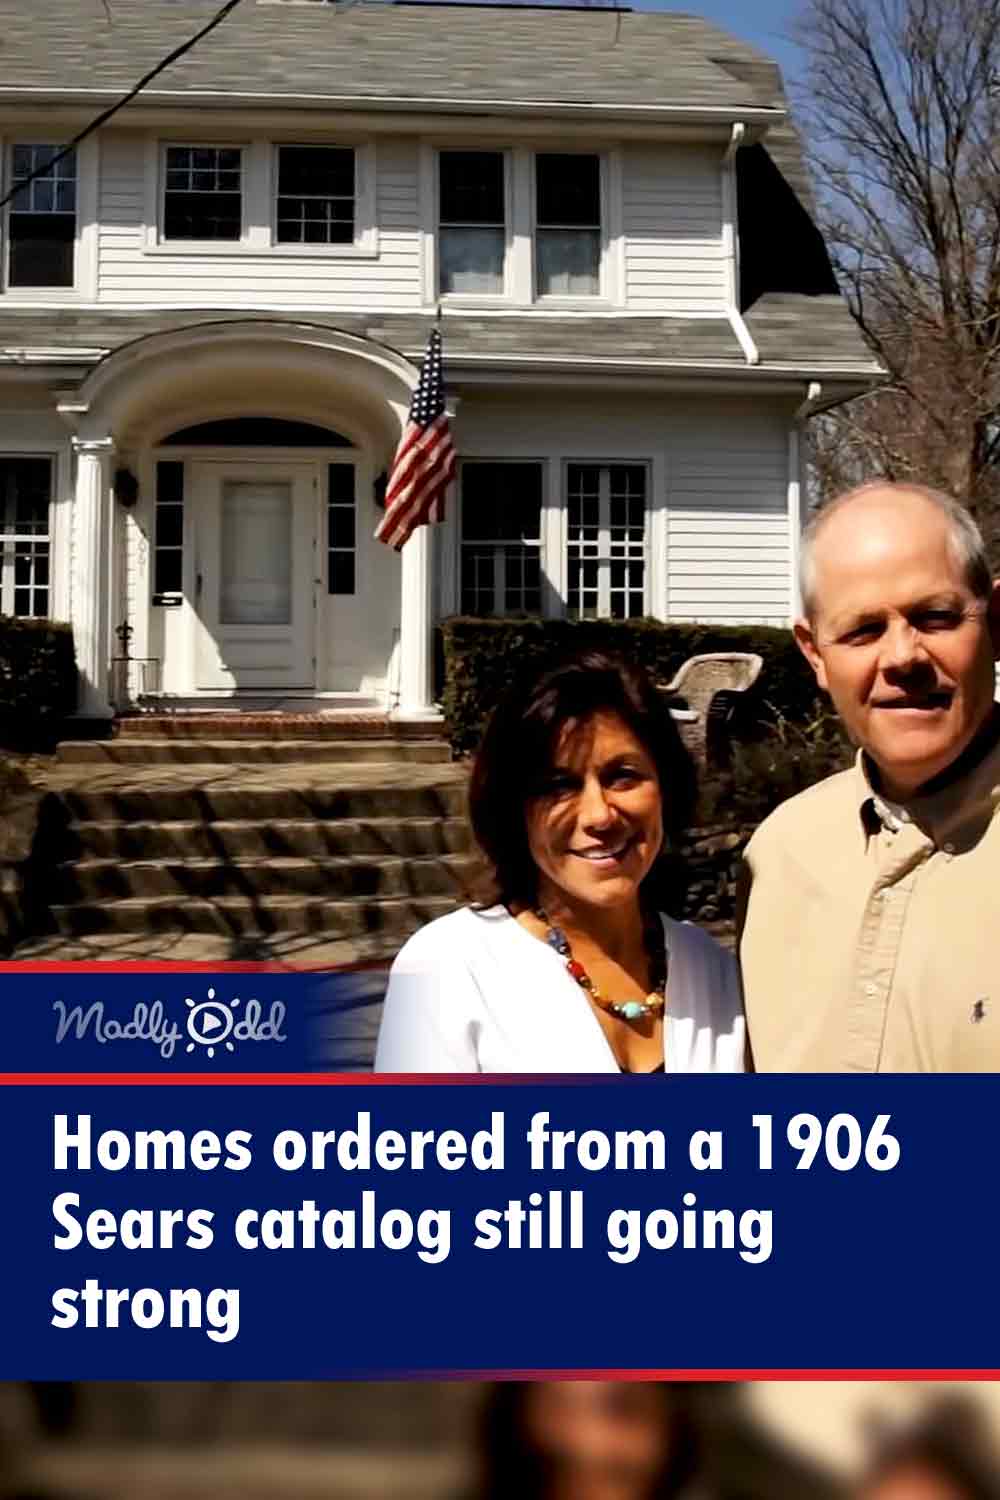 Homes ordered from a 1906 Sears catalog still going strong